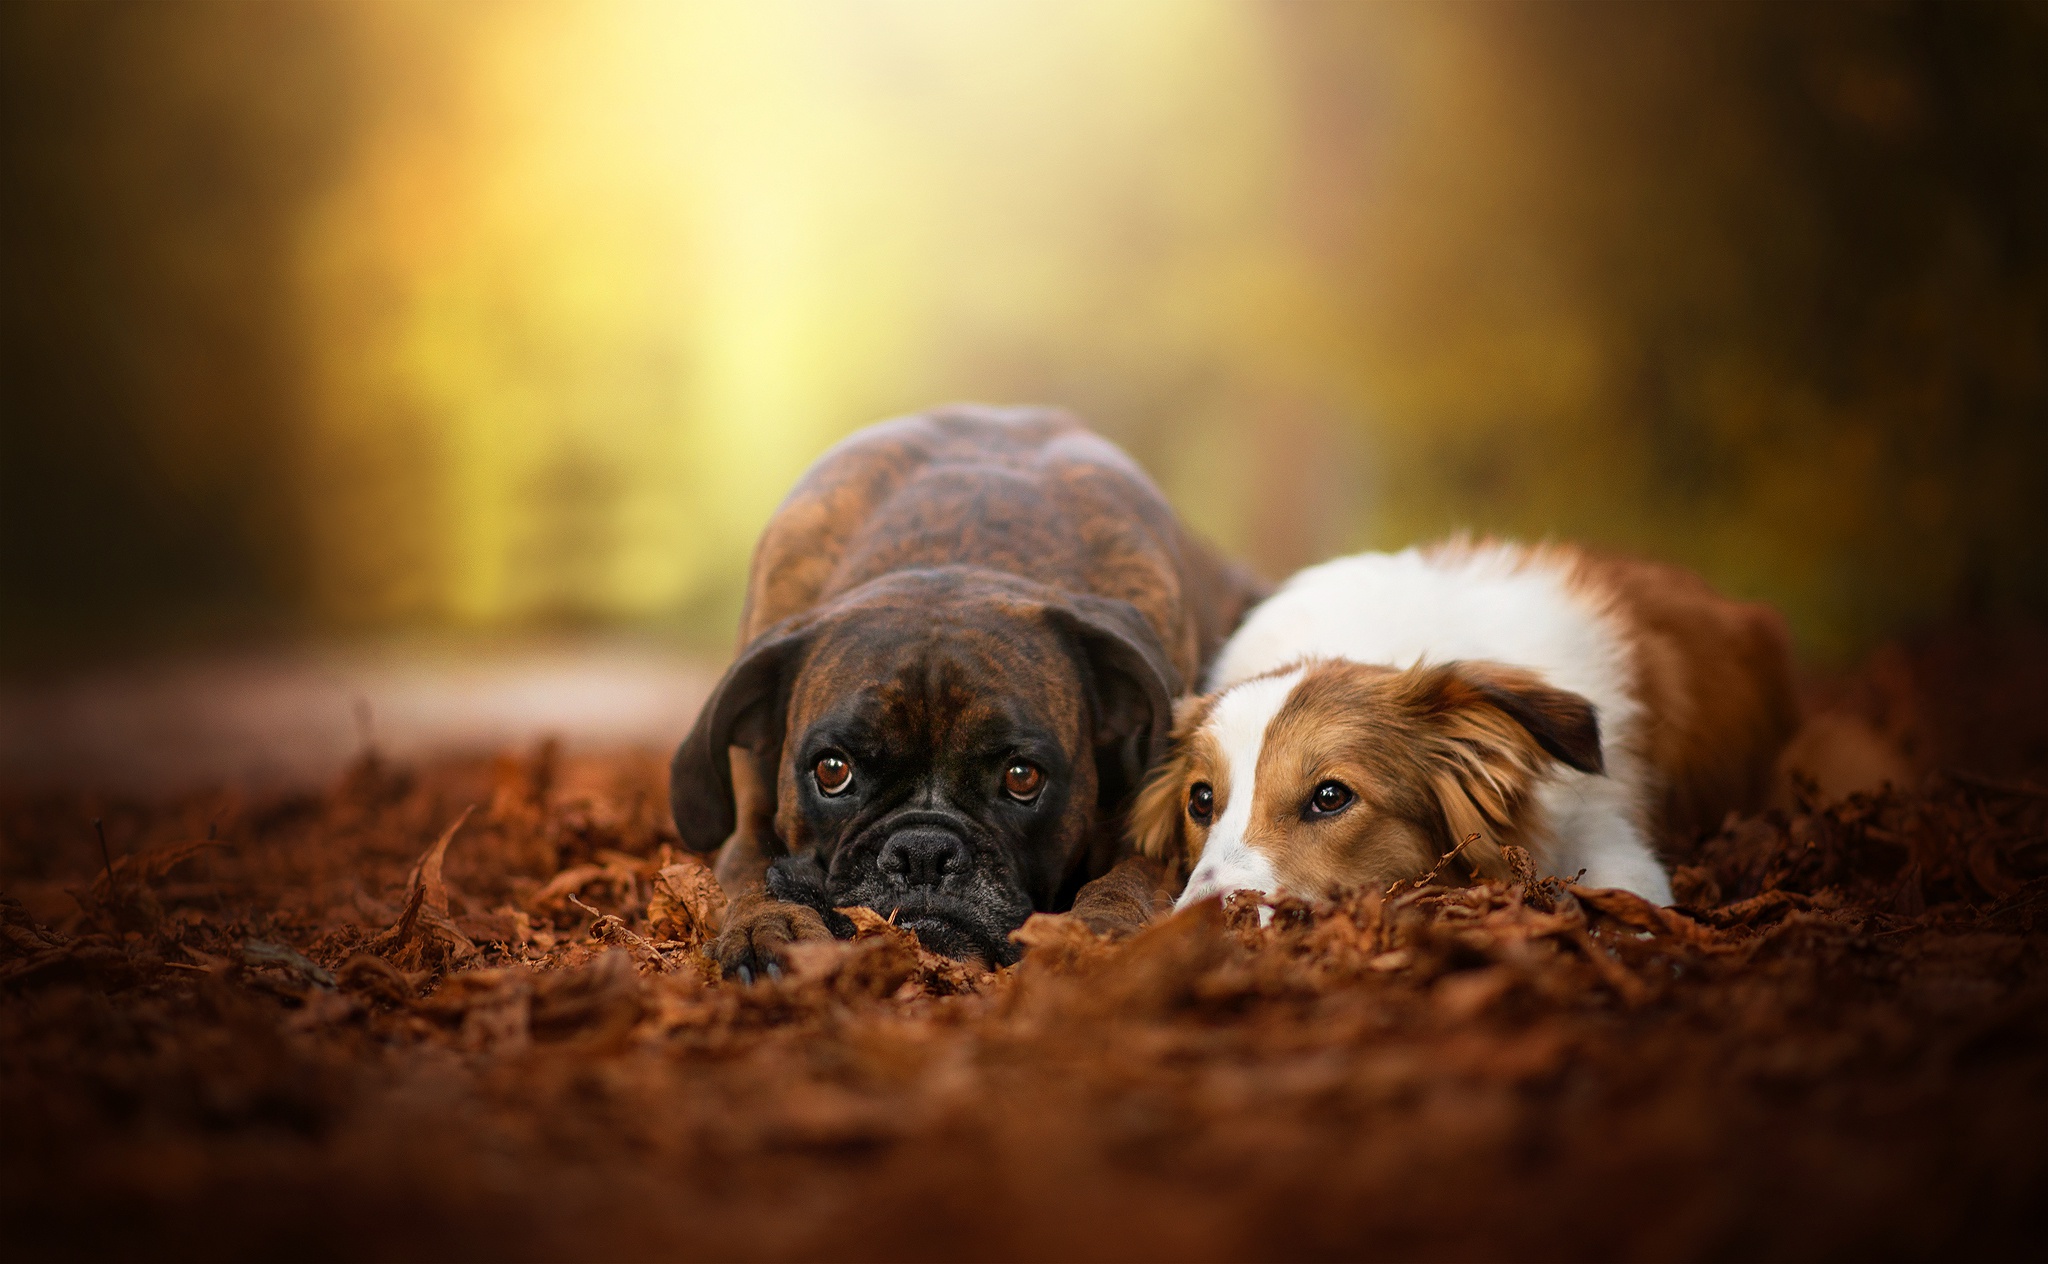 General 2048x1264 dog animals outdoors blurred fall leaves